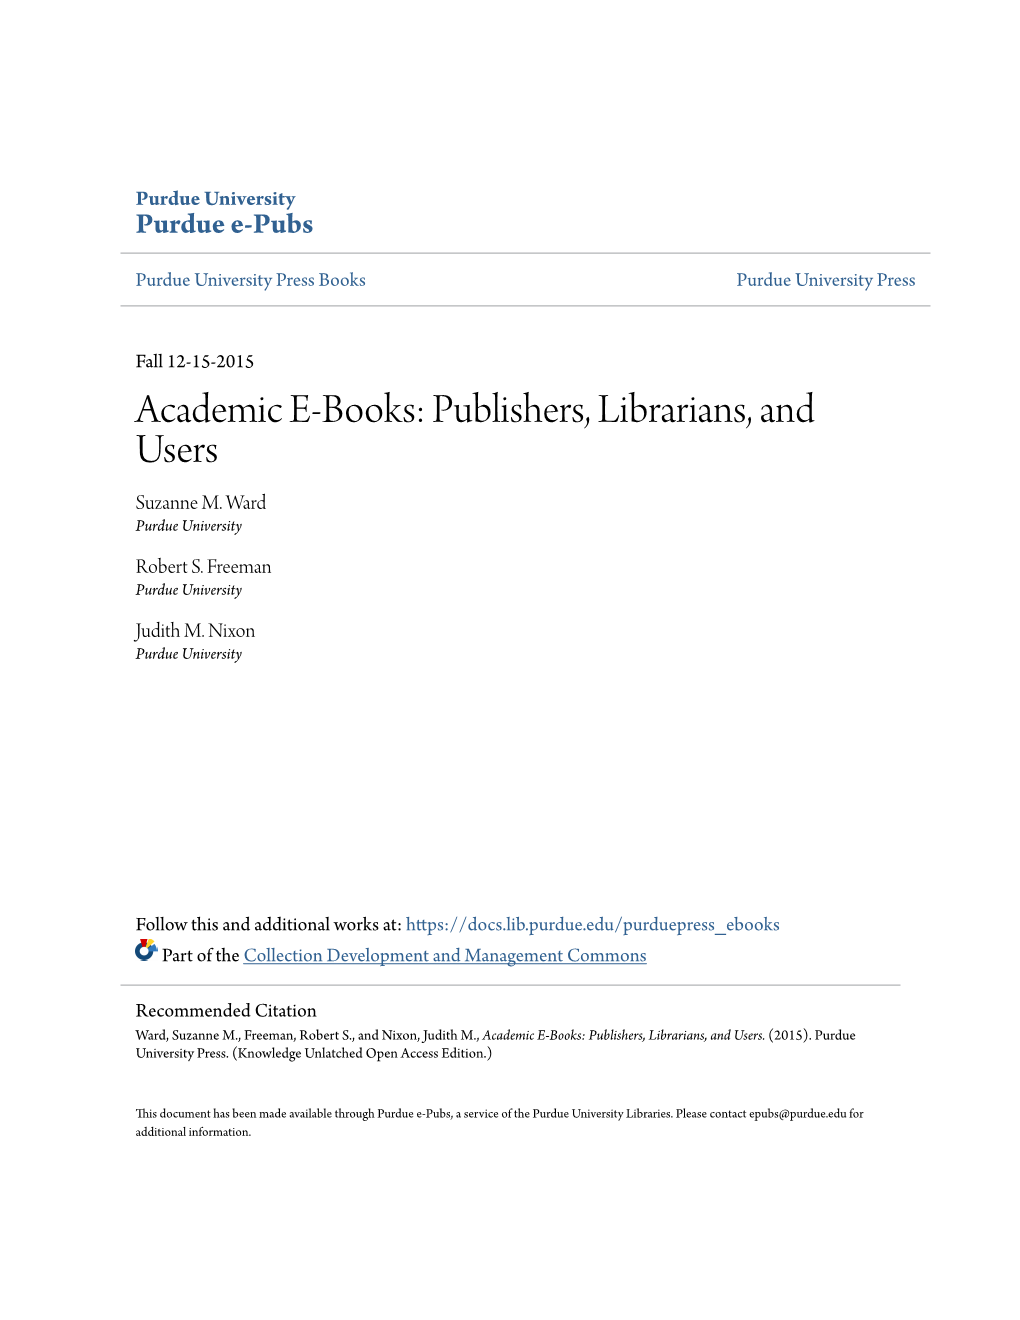 Academic E-Books: Publishers, Librarians, and Users Suzanne M